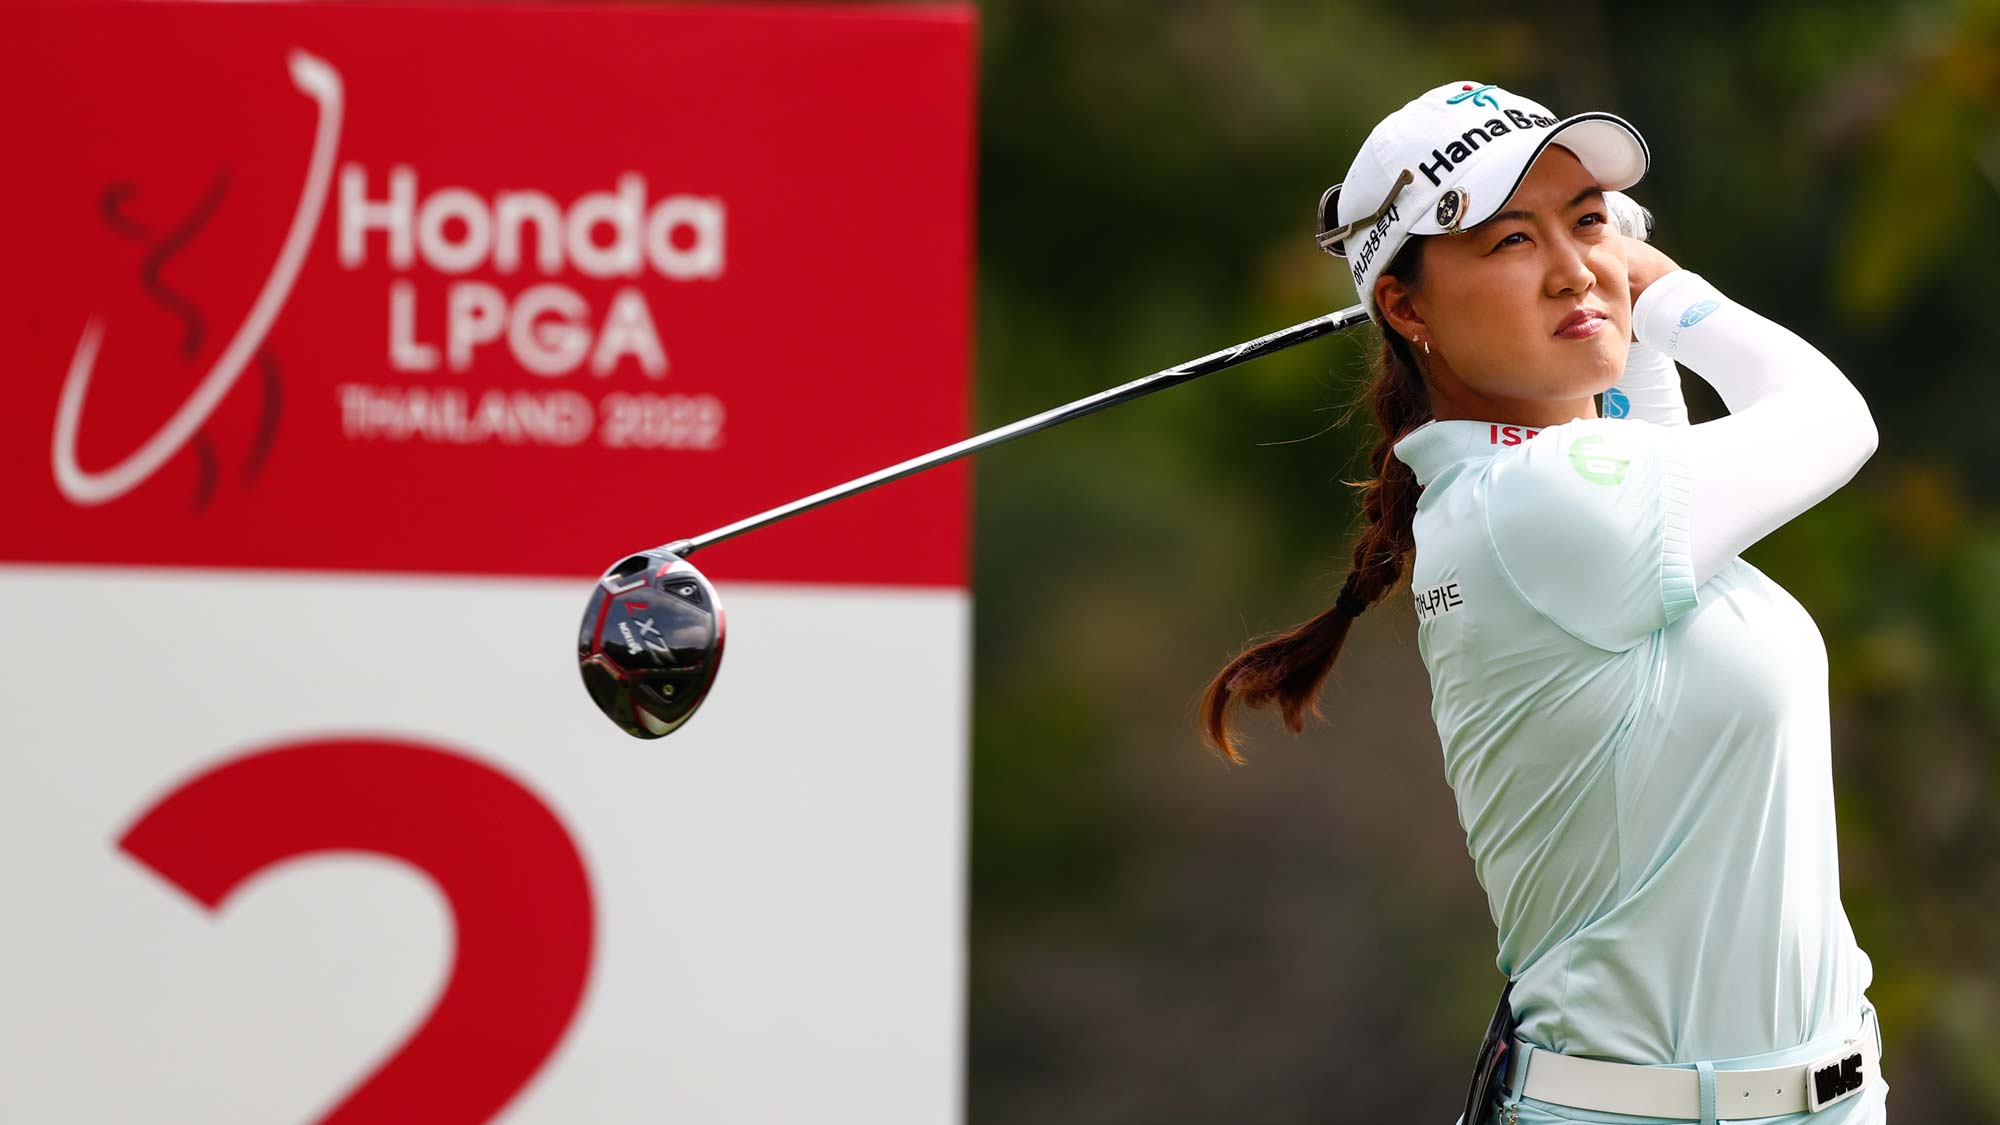 Minjee Lee of Australia tees off on the 2nd hole during the first round of Honda LPGA Thailand